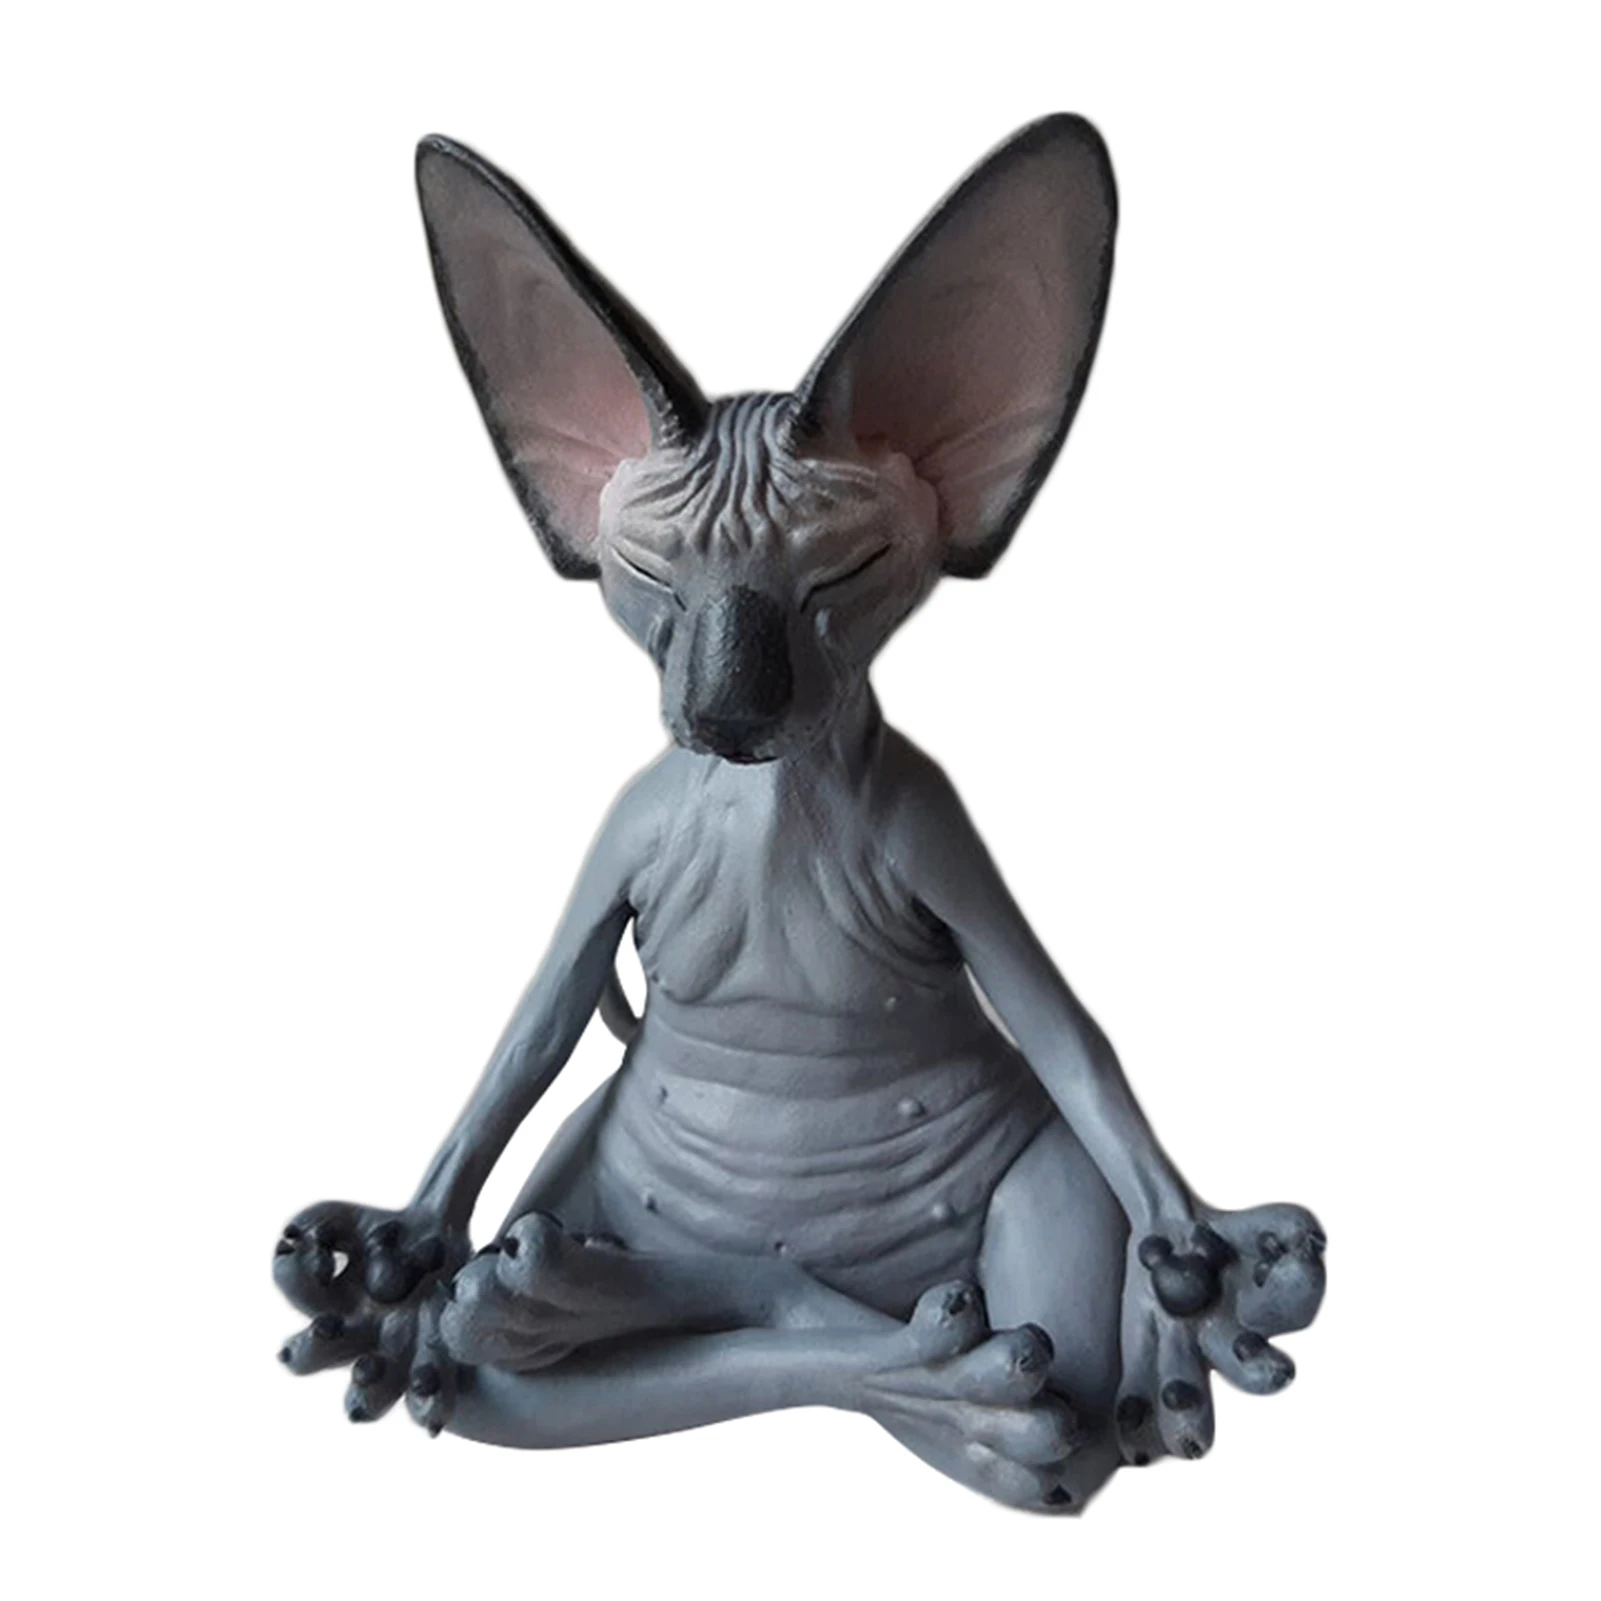 

Sphynx Cat Meditate Statue Cute Hairless Cat Yoga Sitting Collectible Figure For Room Desk Decoration